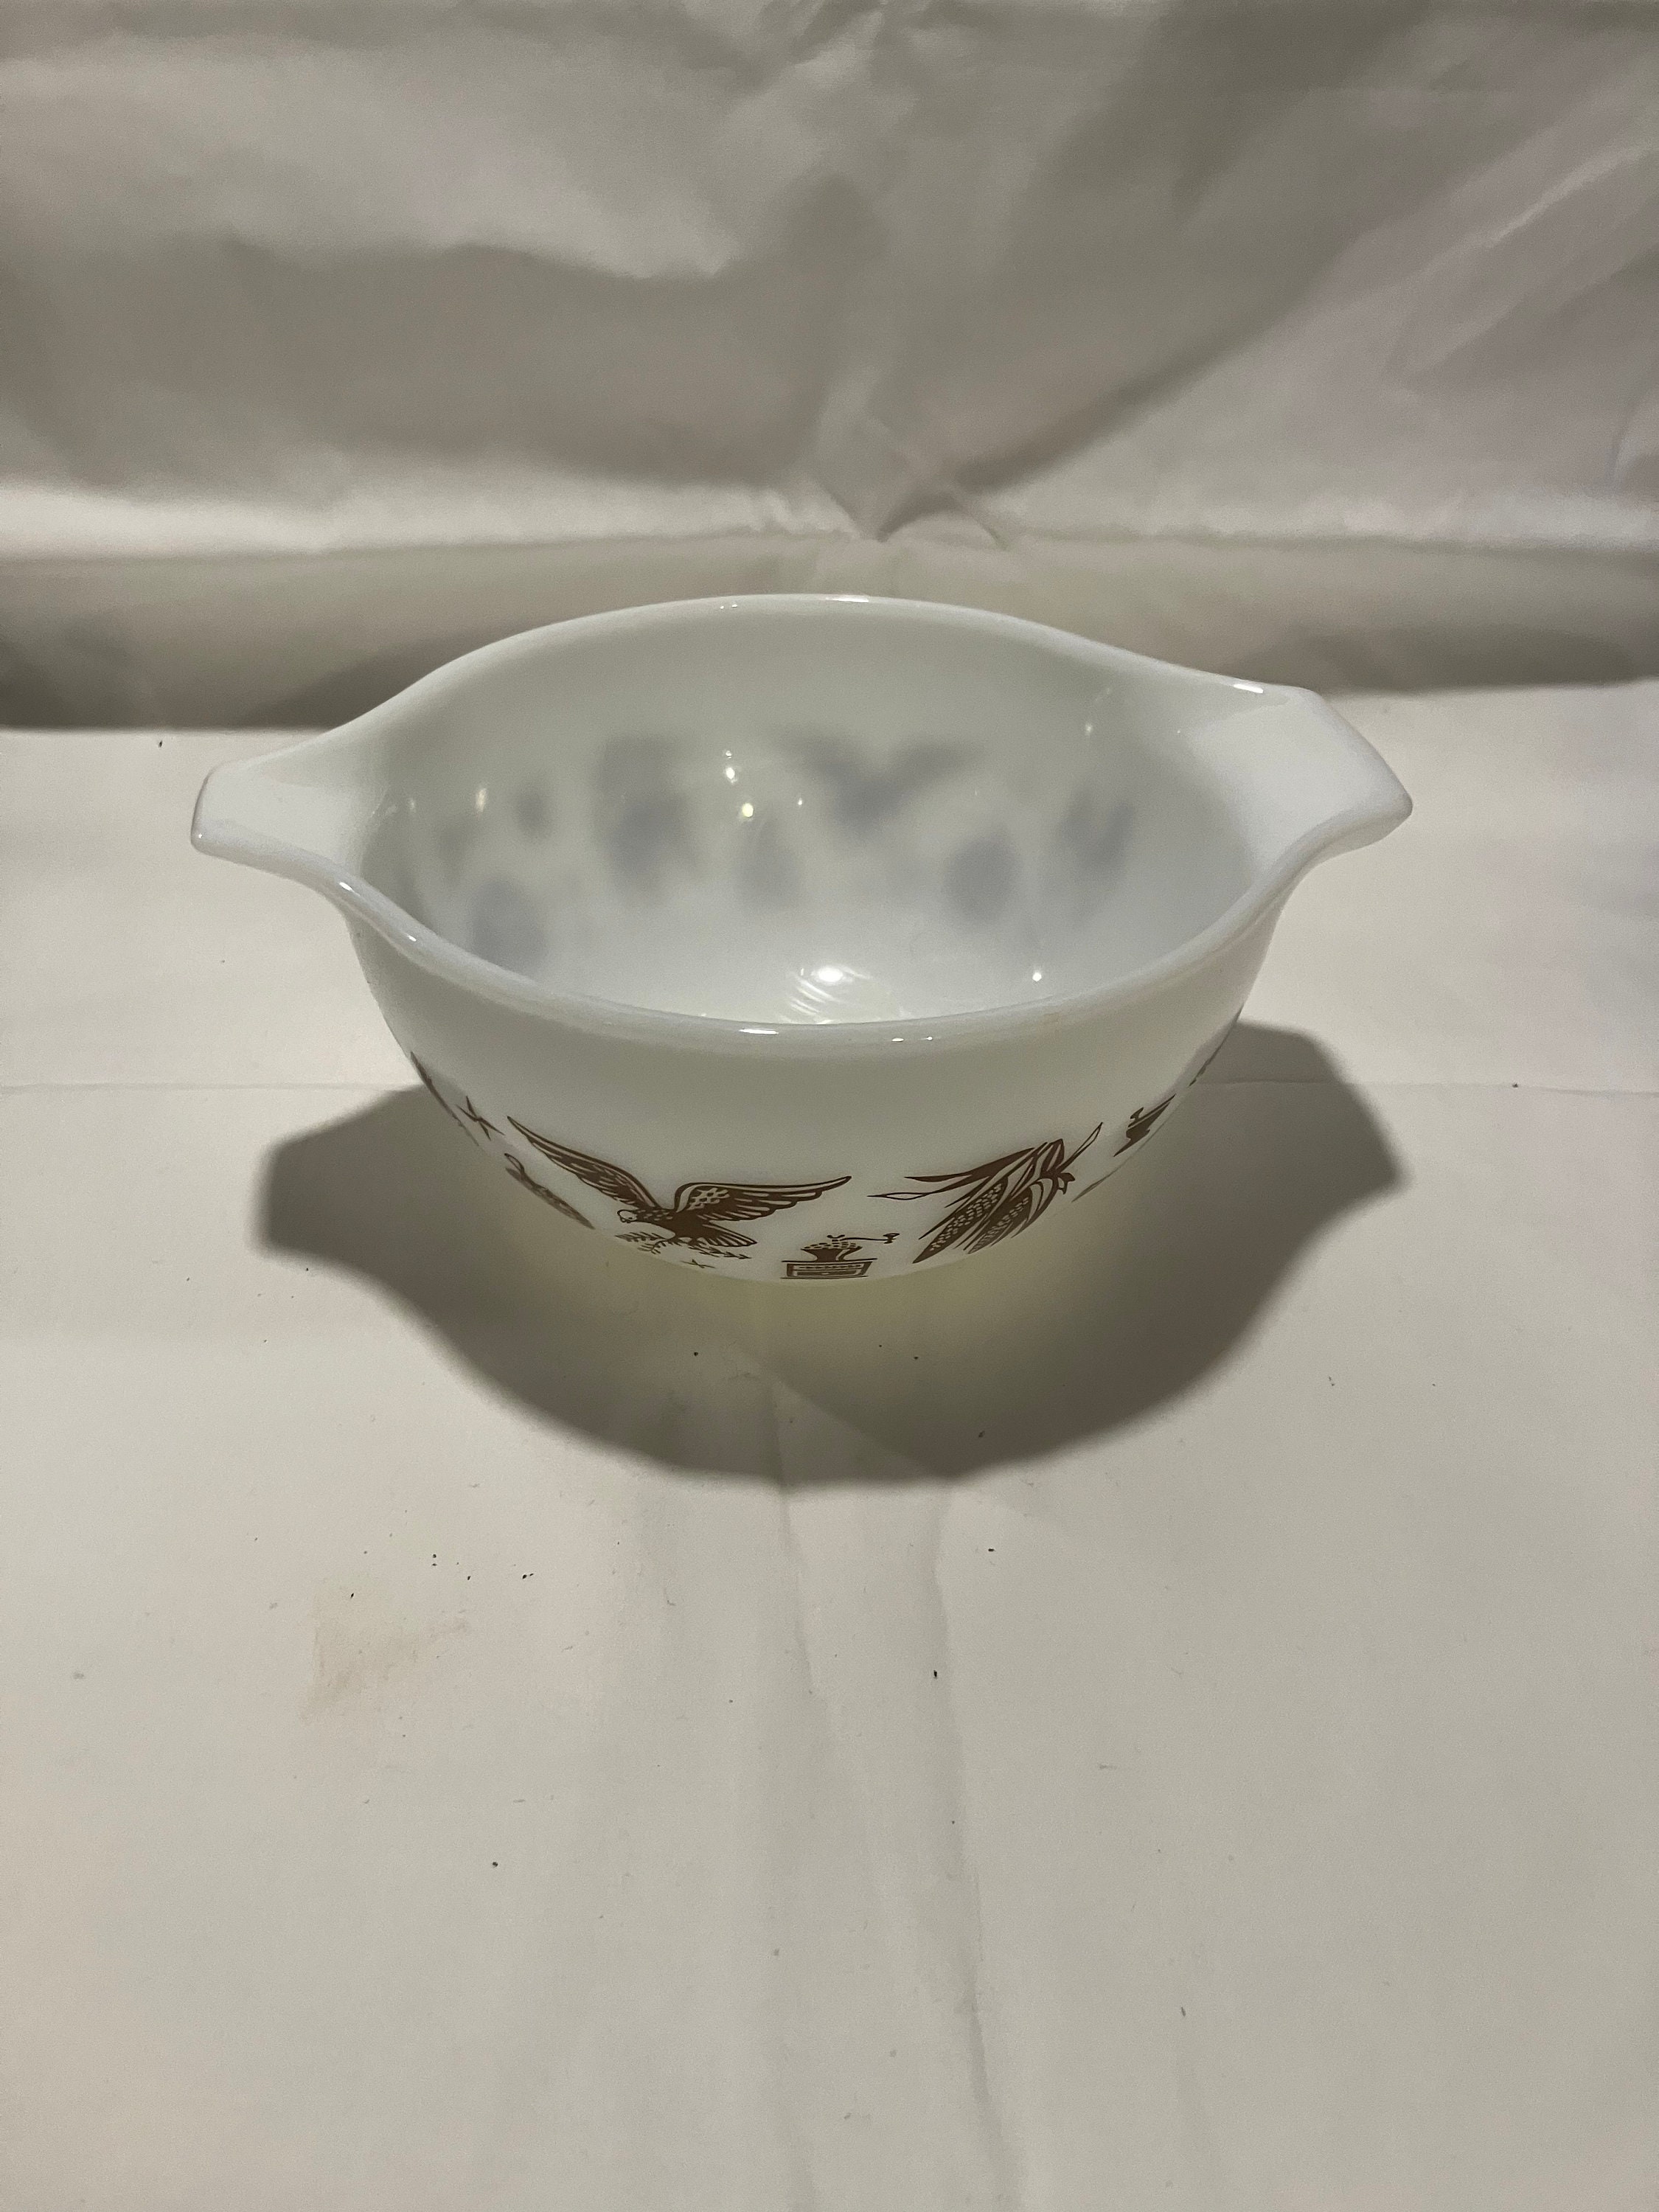 1.5 Quart Glass Mixing Bowl - Liberty Tabletop - Made in the USA!